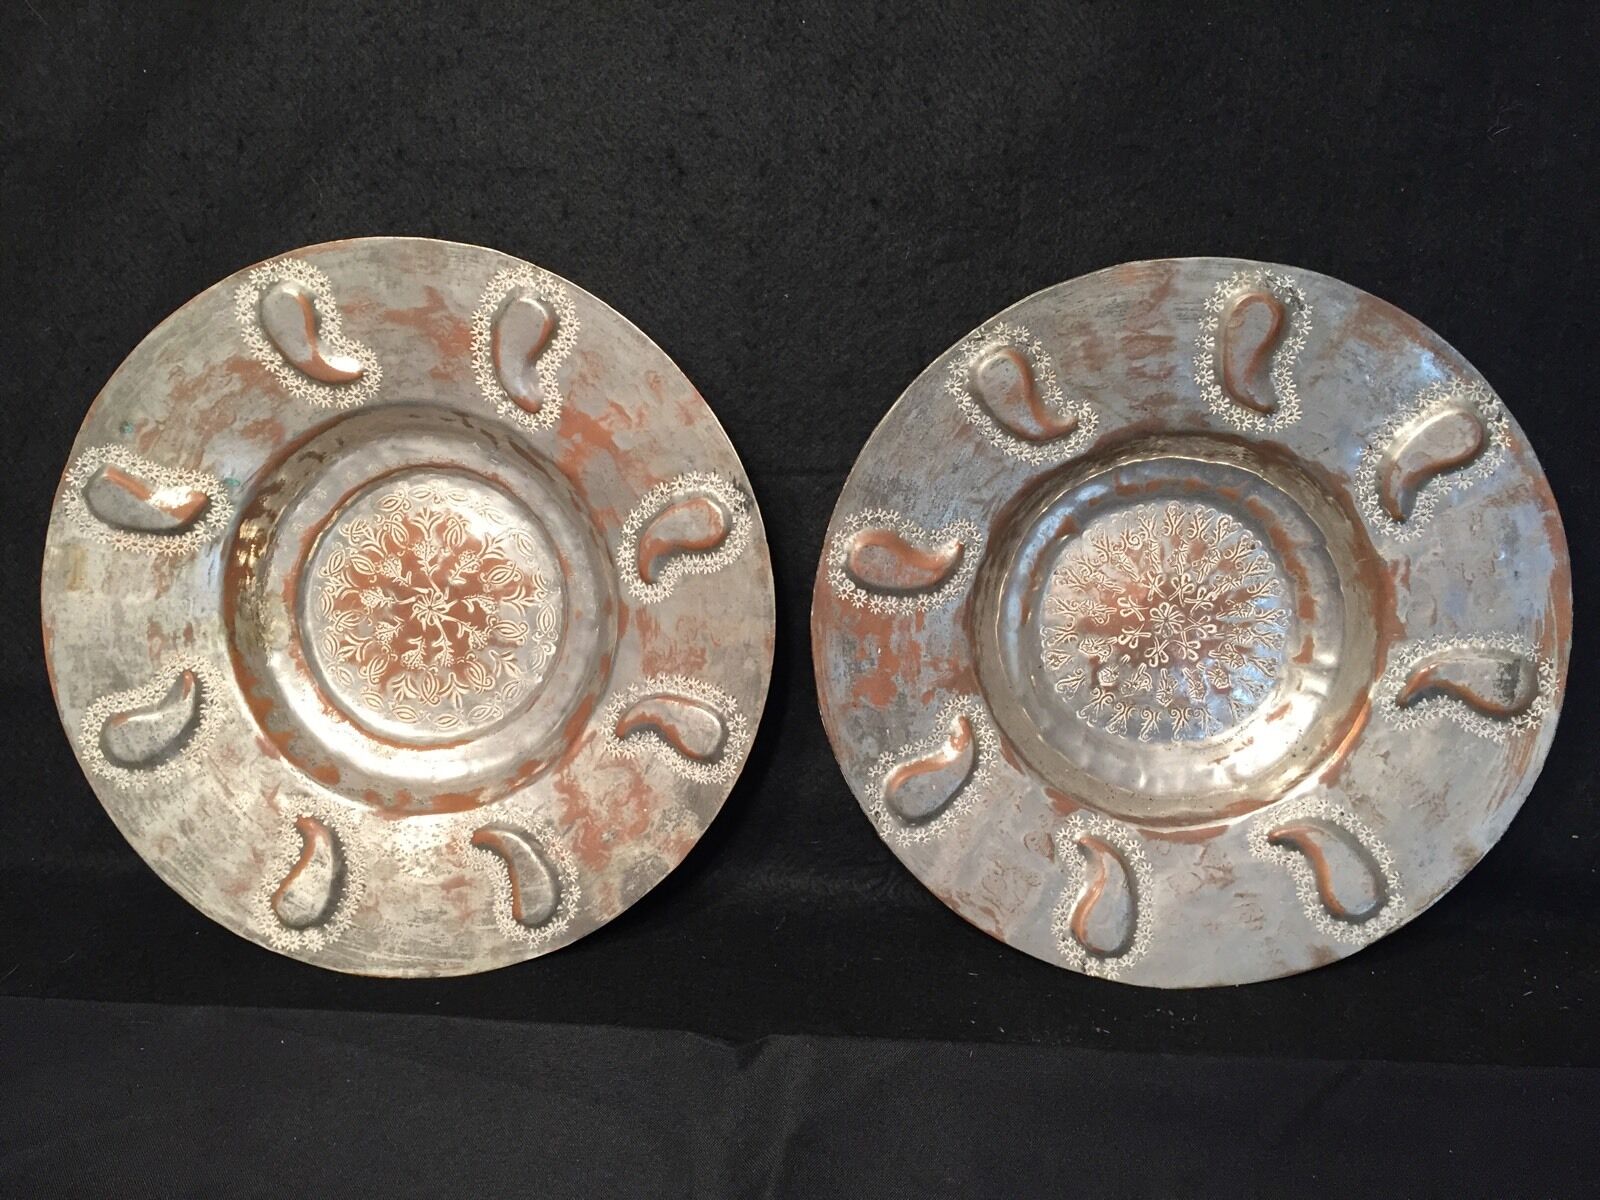 PAIR MIDDLE EASTERN ANTIQUE ISLAMIC Ottoman EGYPT COPPER BOWLS HAMMERED MARKED